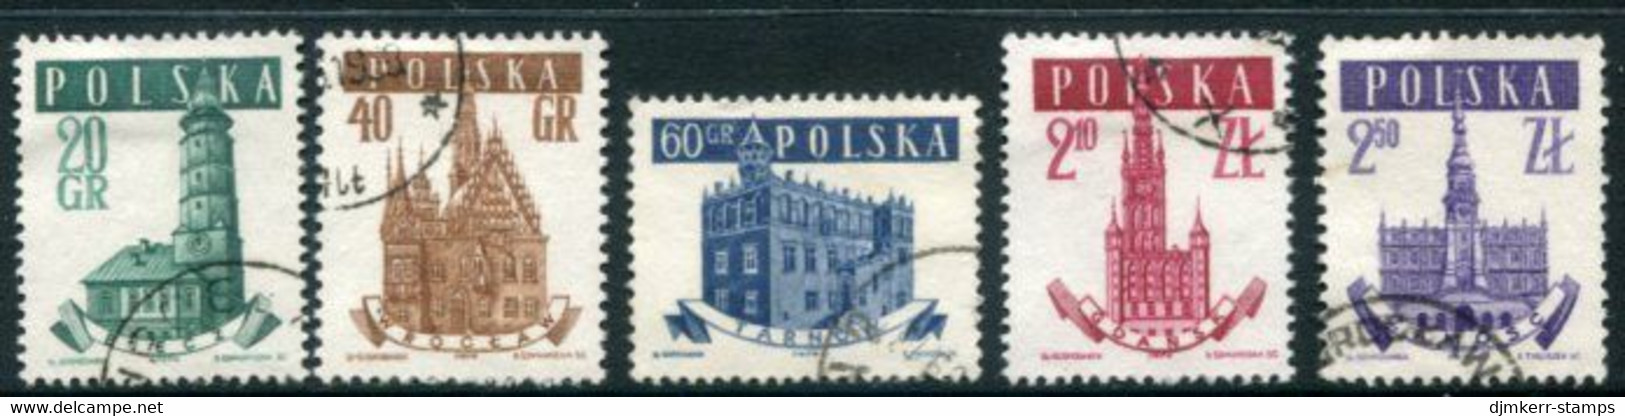 POLAND 1958 Town Halls Used  Michel 1046-50 - Used Stamps